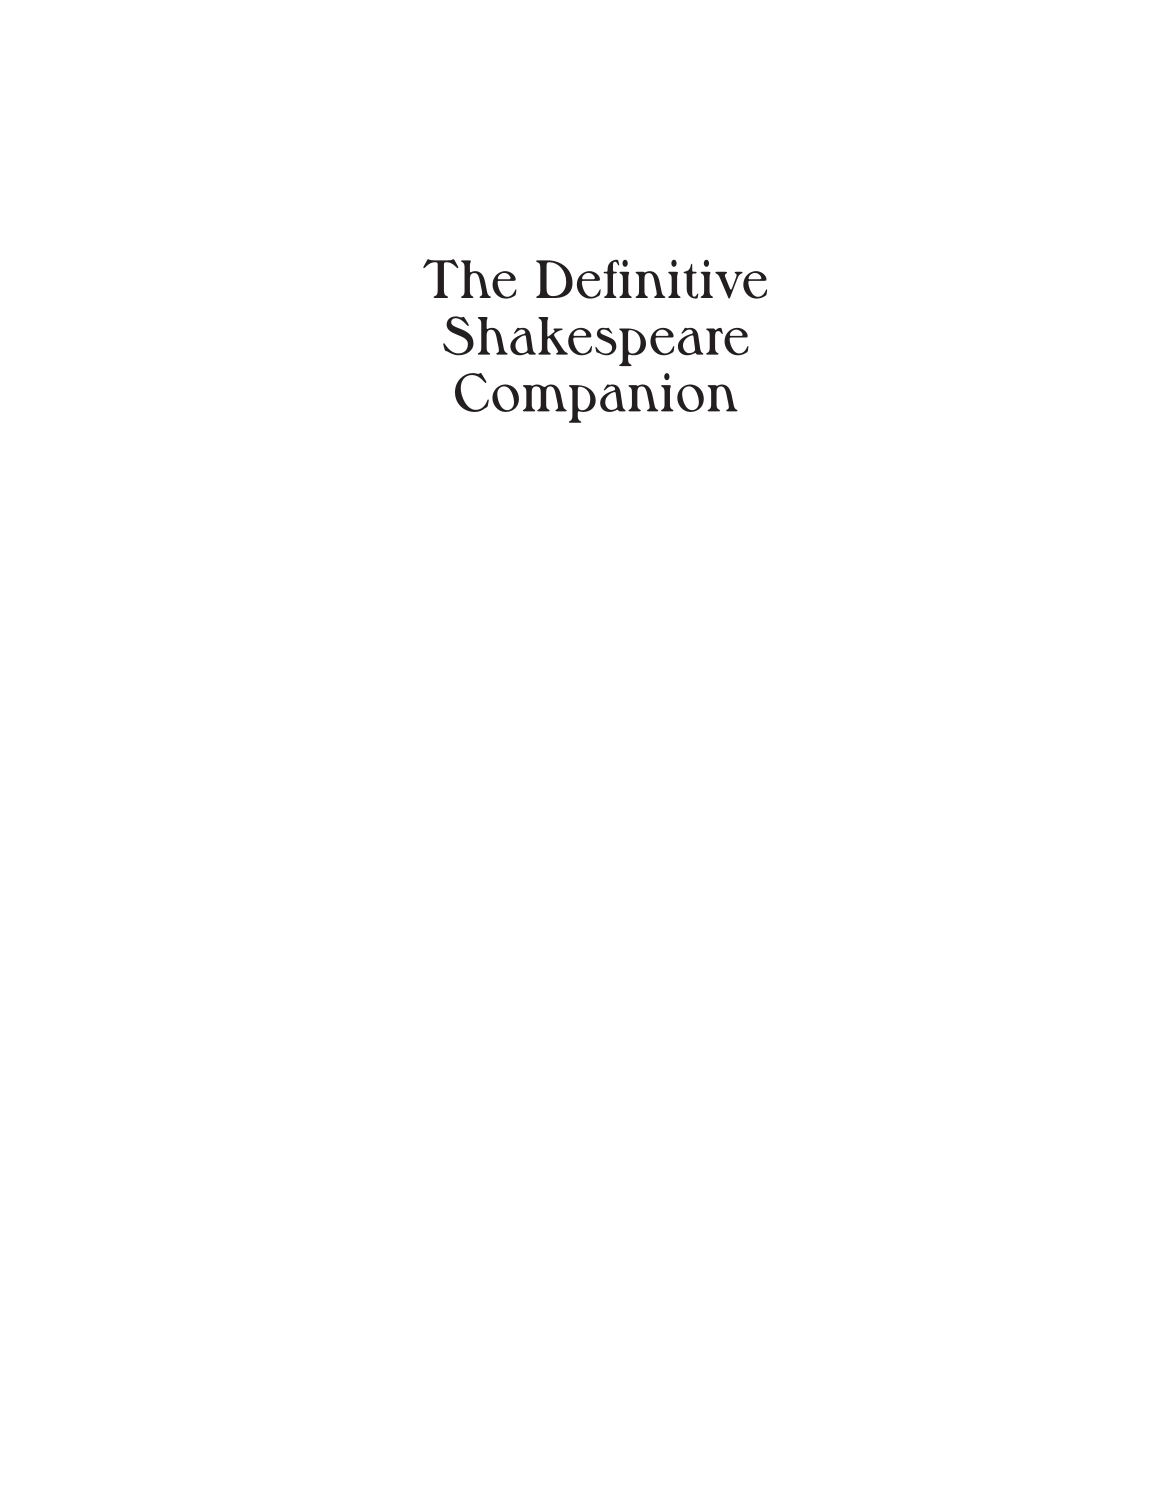 The Definitive Shakespeare Companion: Overviews, Documents, and Analysis [4 volumes] page i